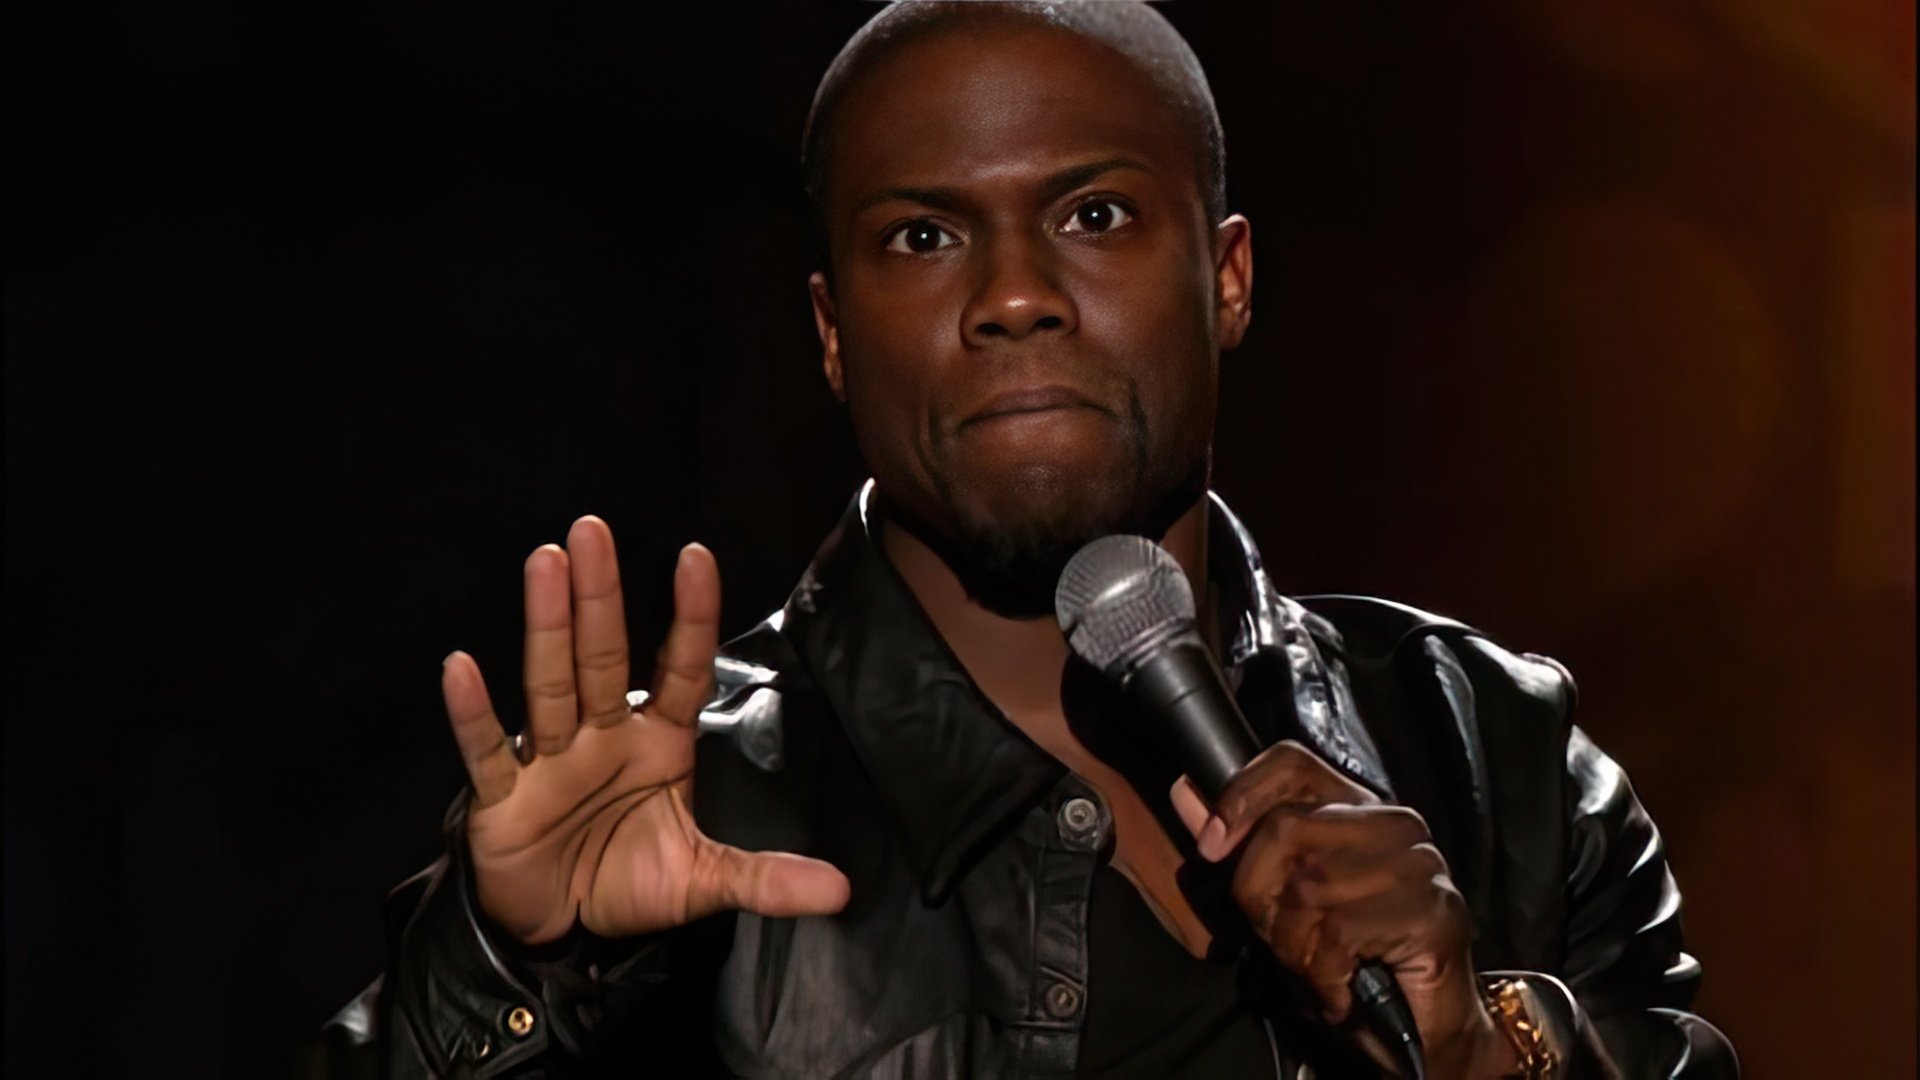 Kevin Hart is a talented comedian and actor